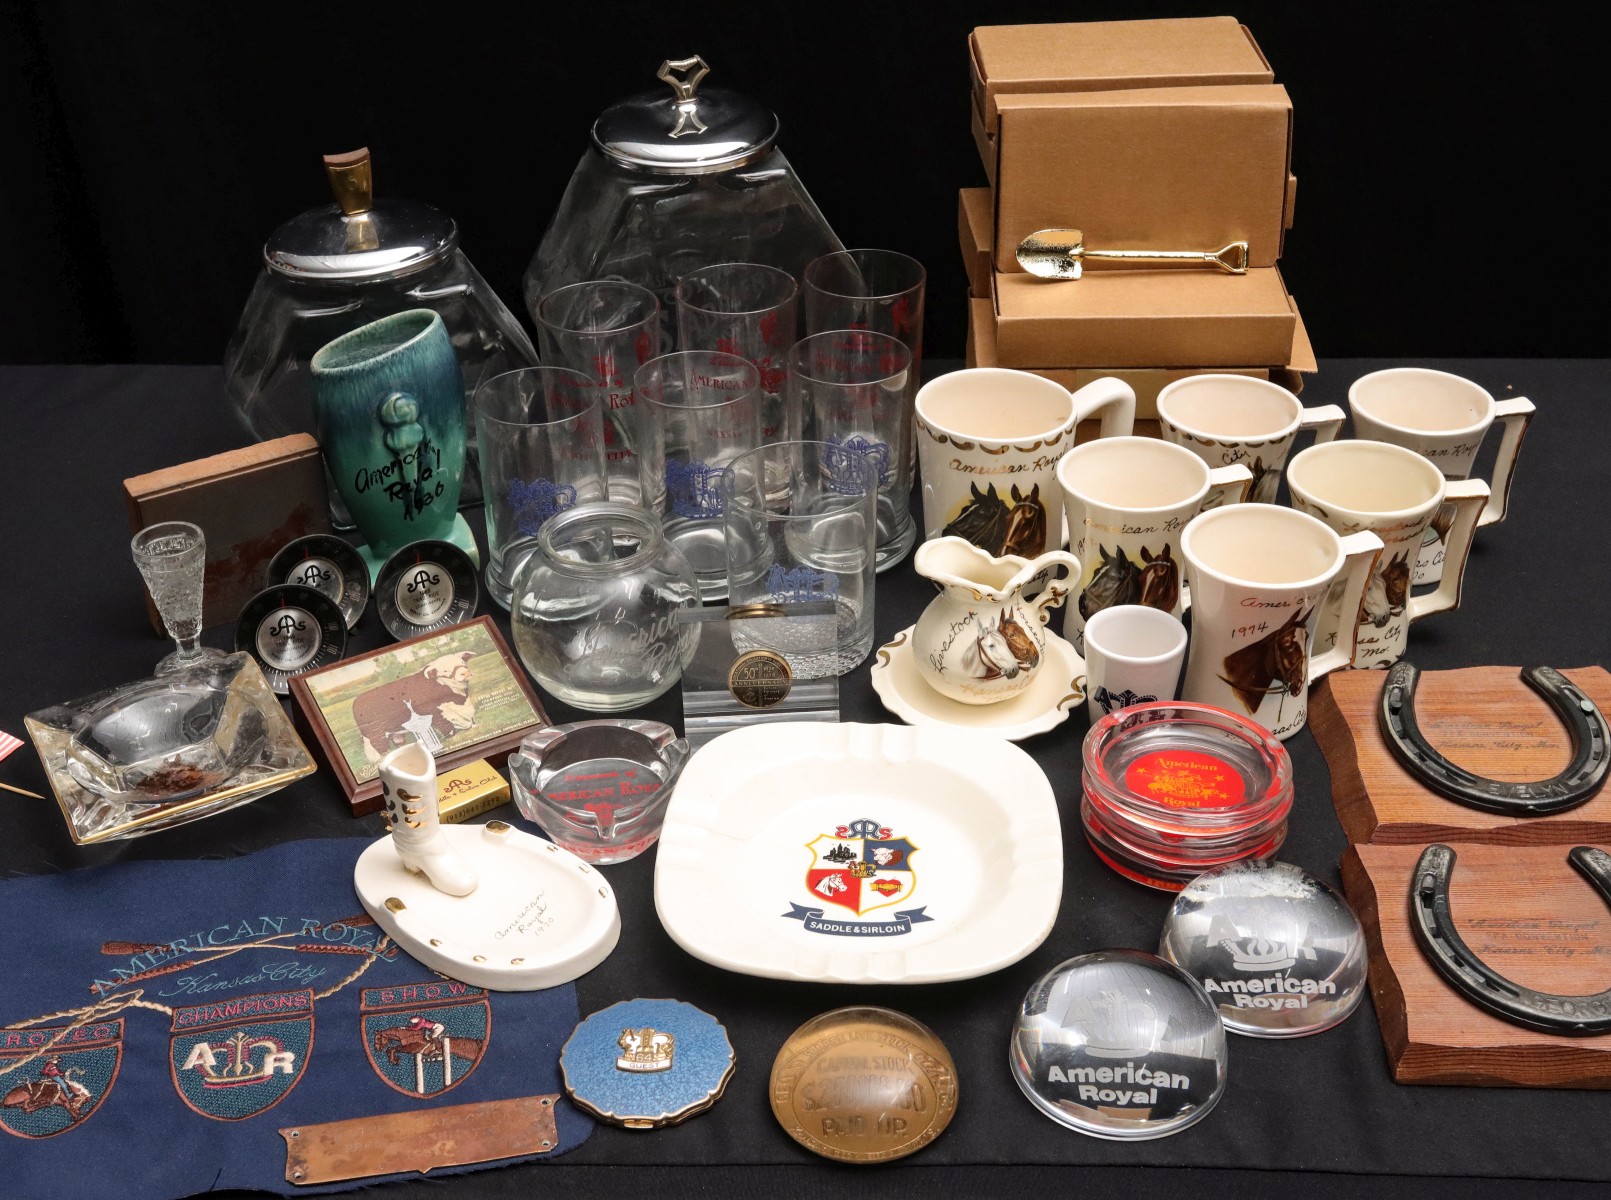 A LARGE COLLECTION OF AMERICAN ROYAL ADVERTISING ITEMS